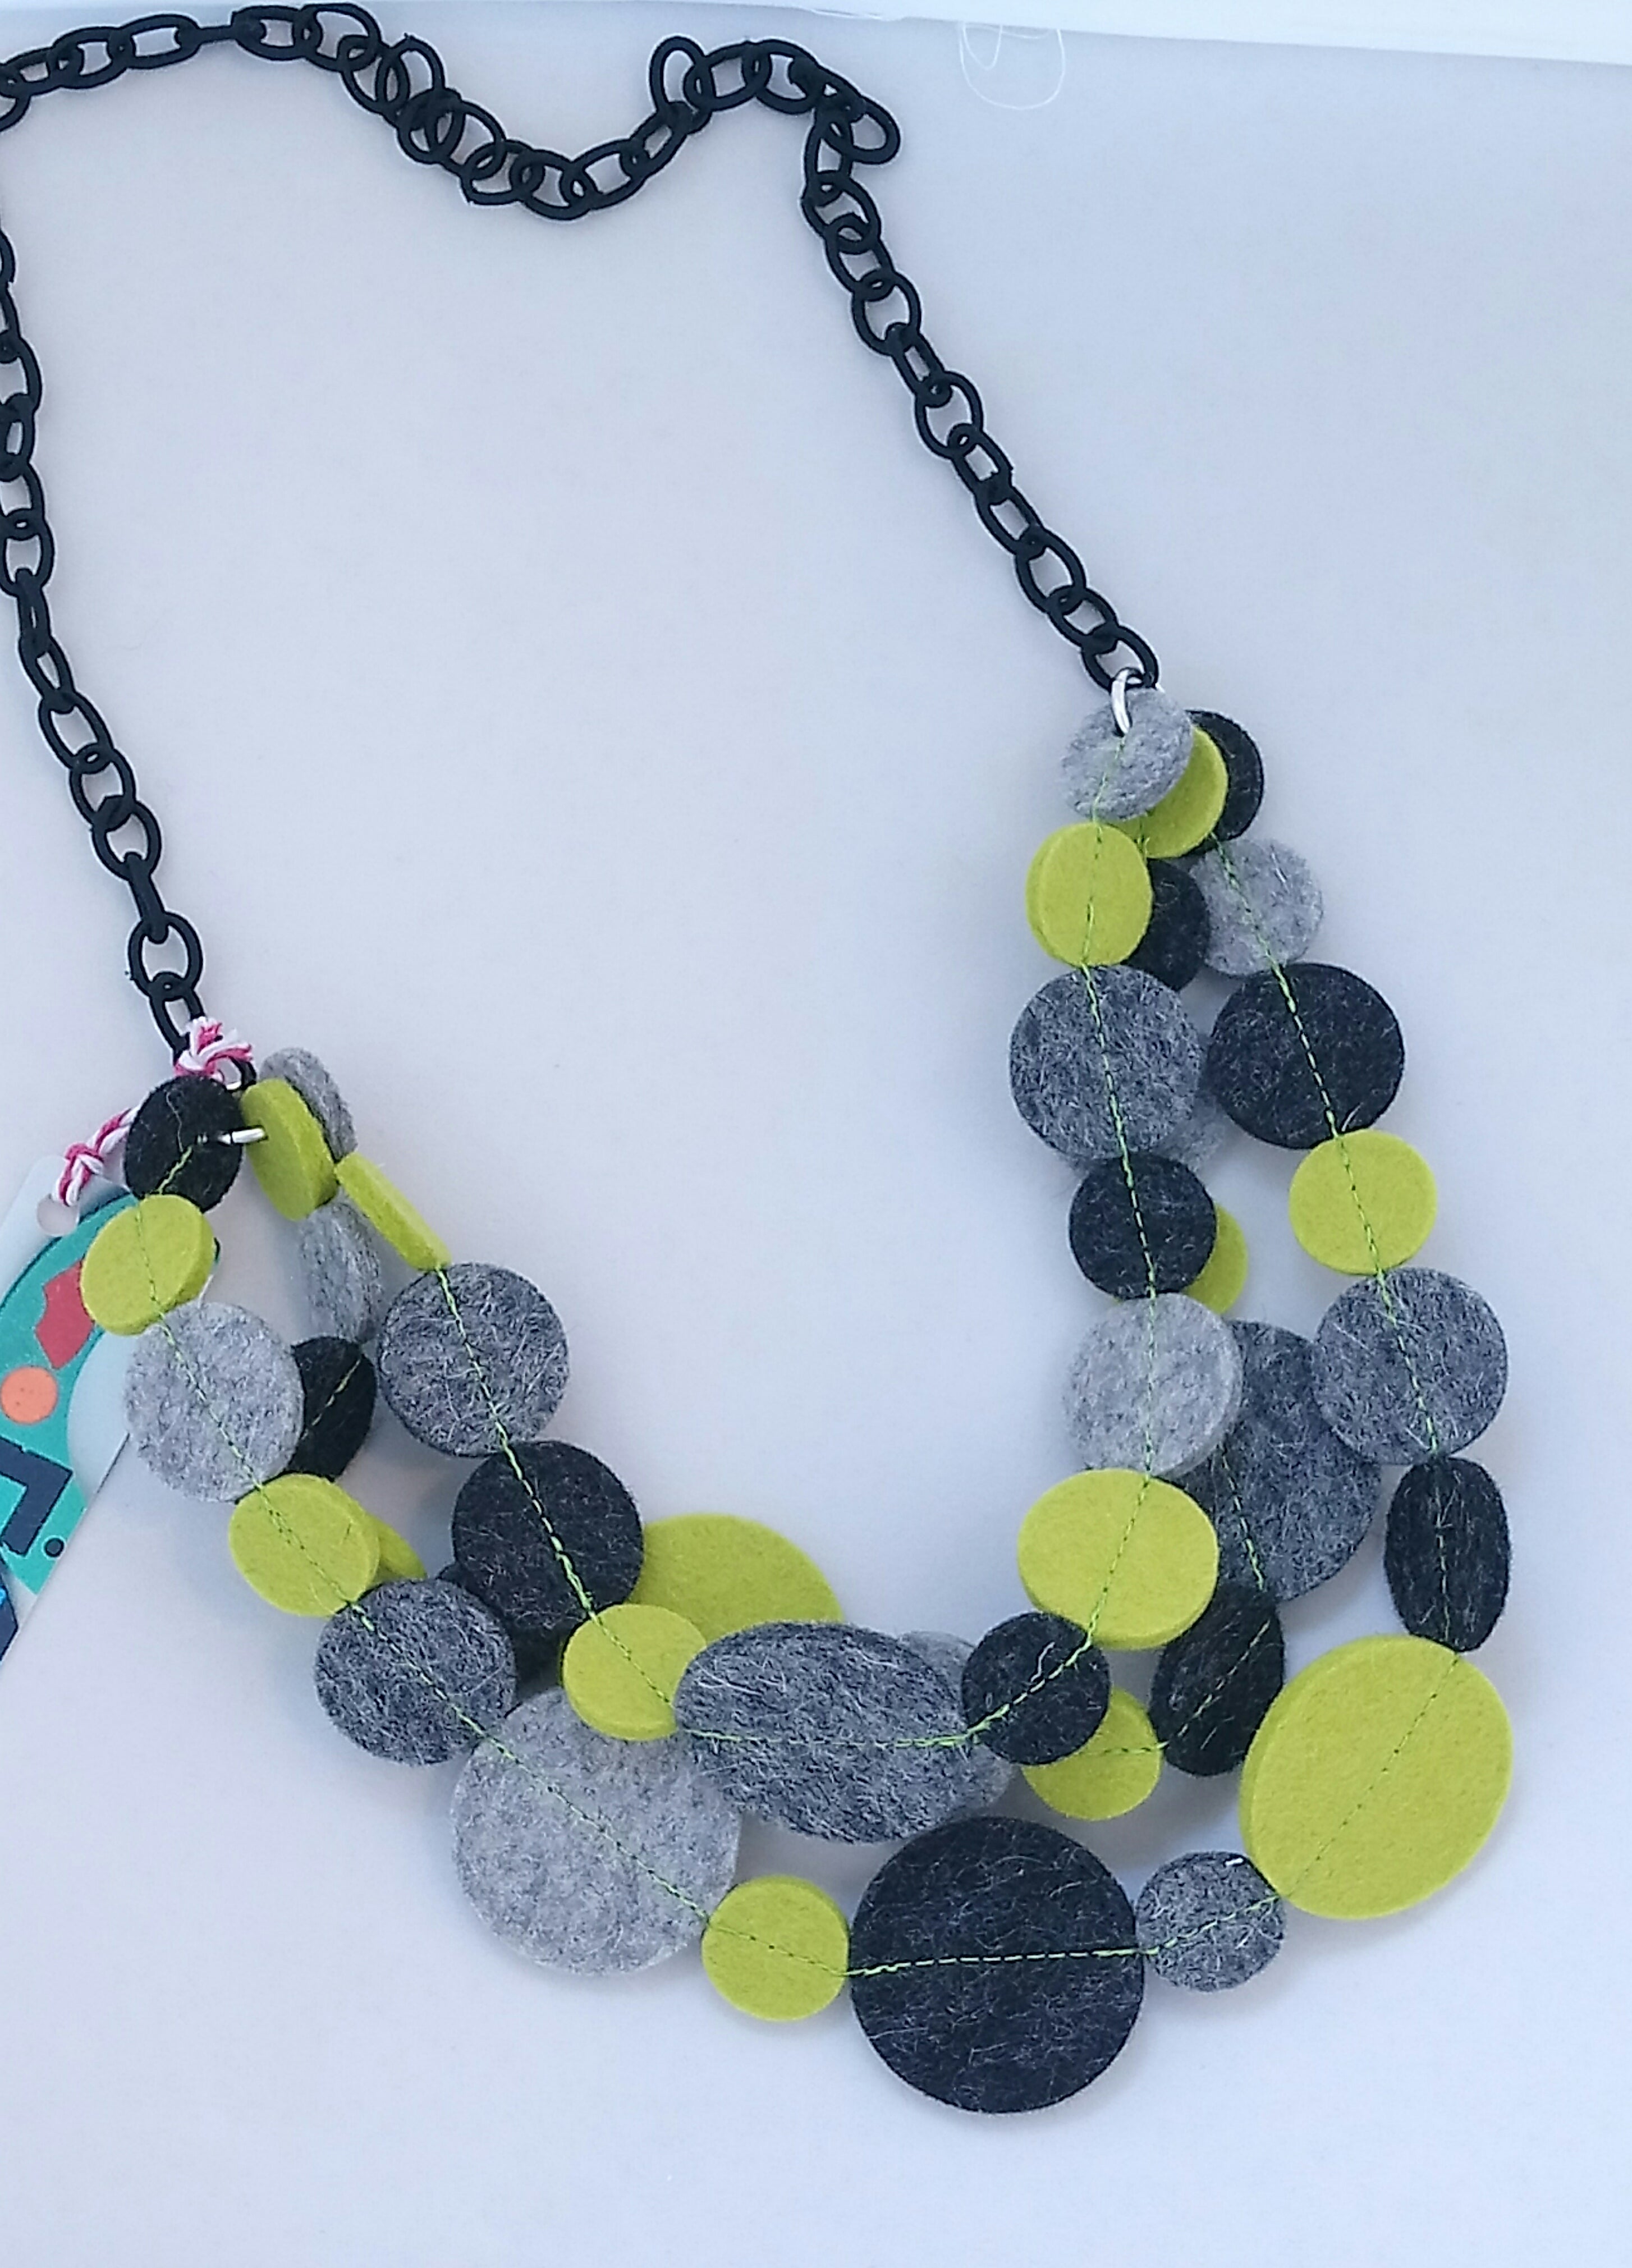 Long Felt Circle Necklaces Made in Scotland by Syrah Jay